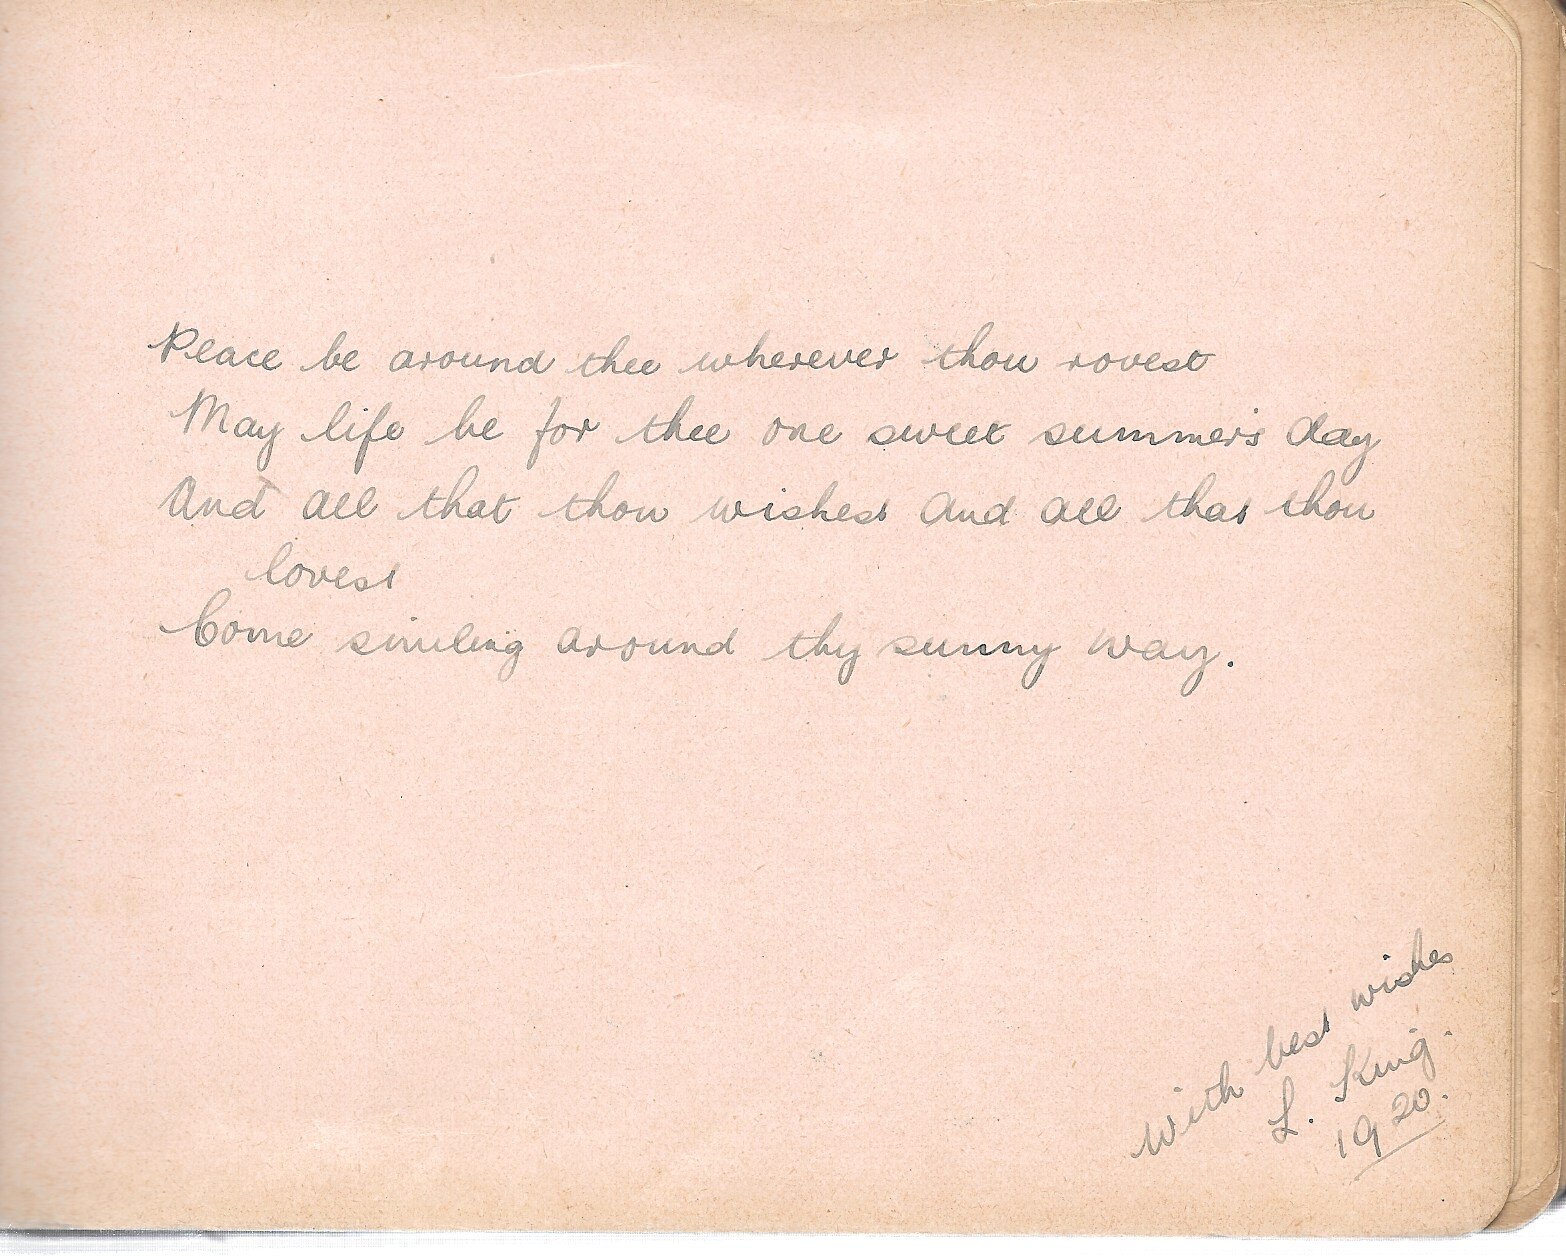  Extract from Miss Glover’s autograph book 